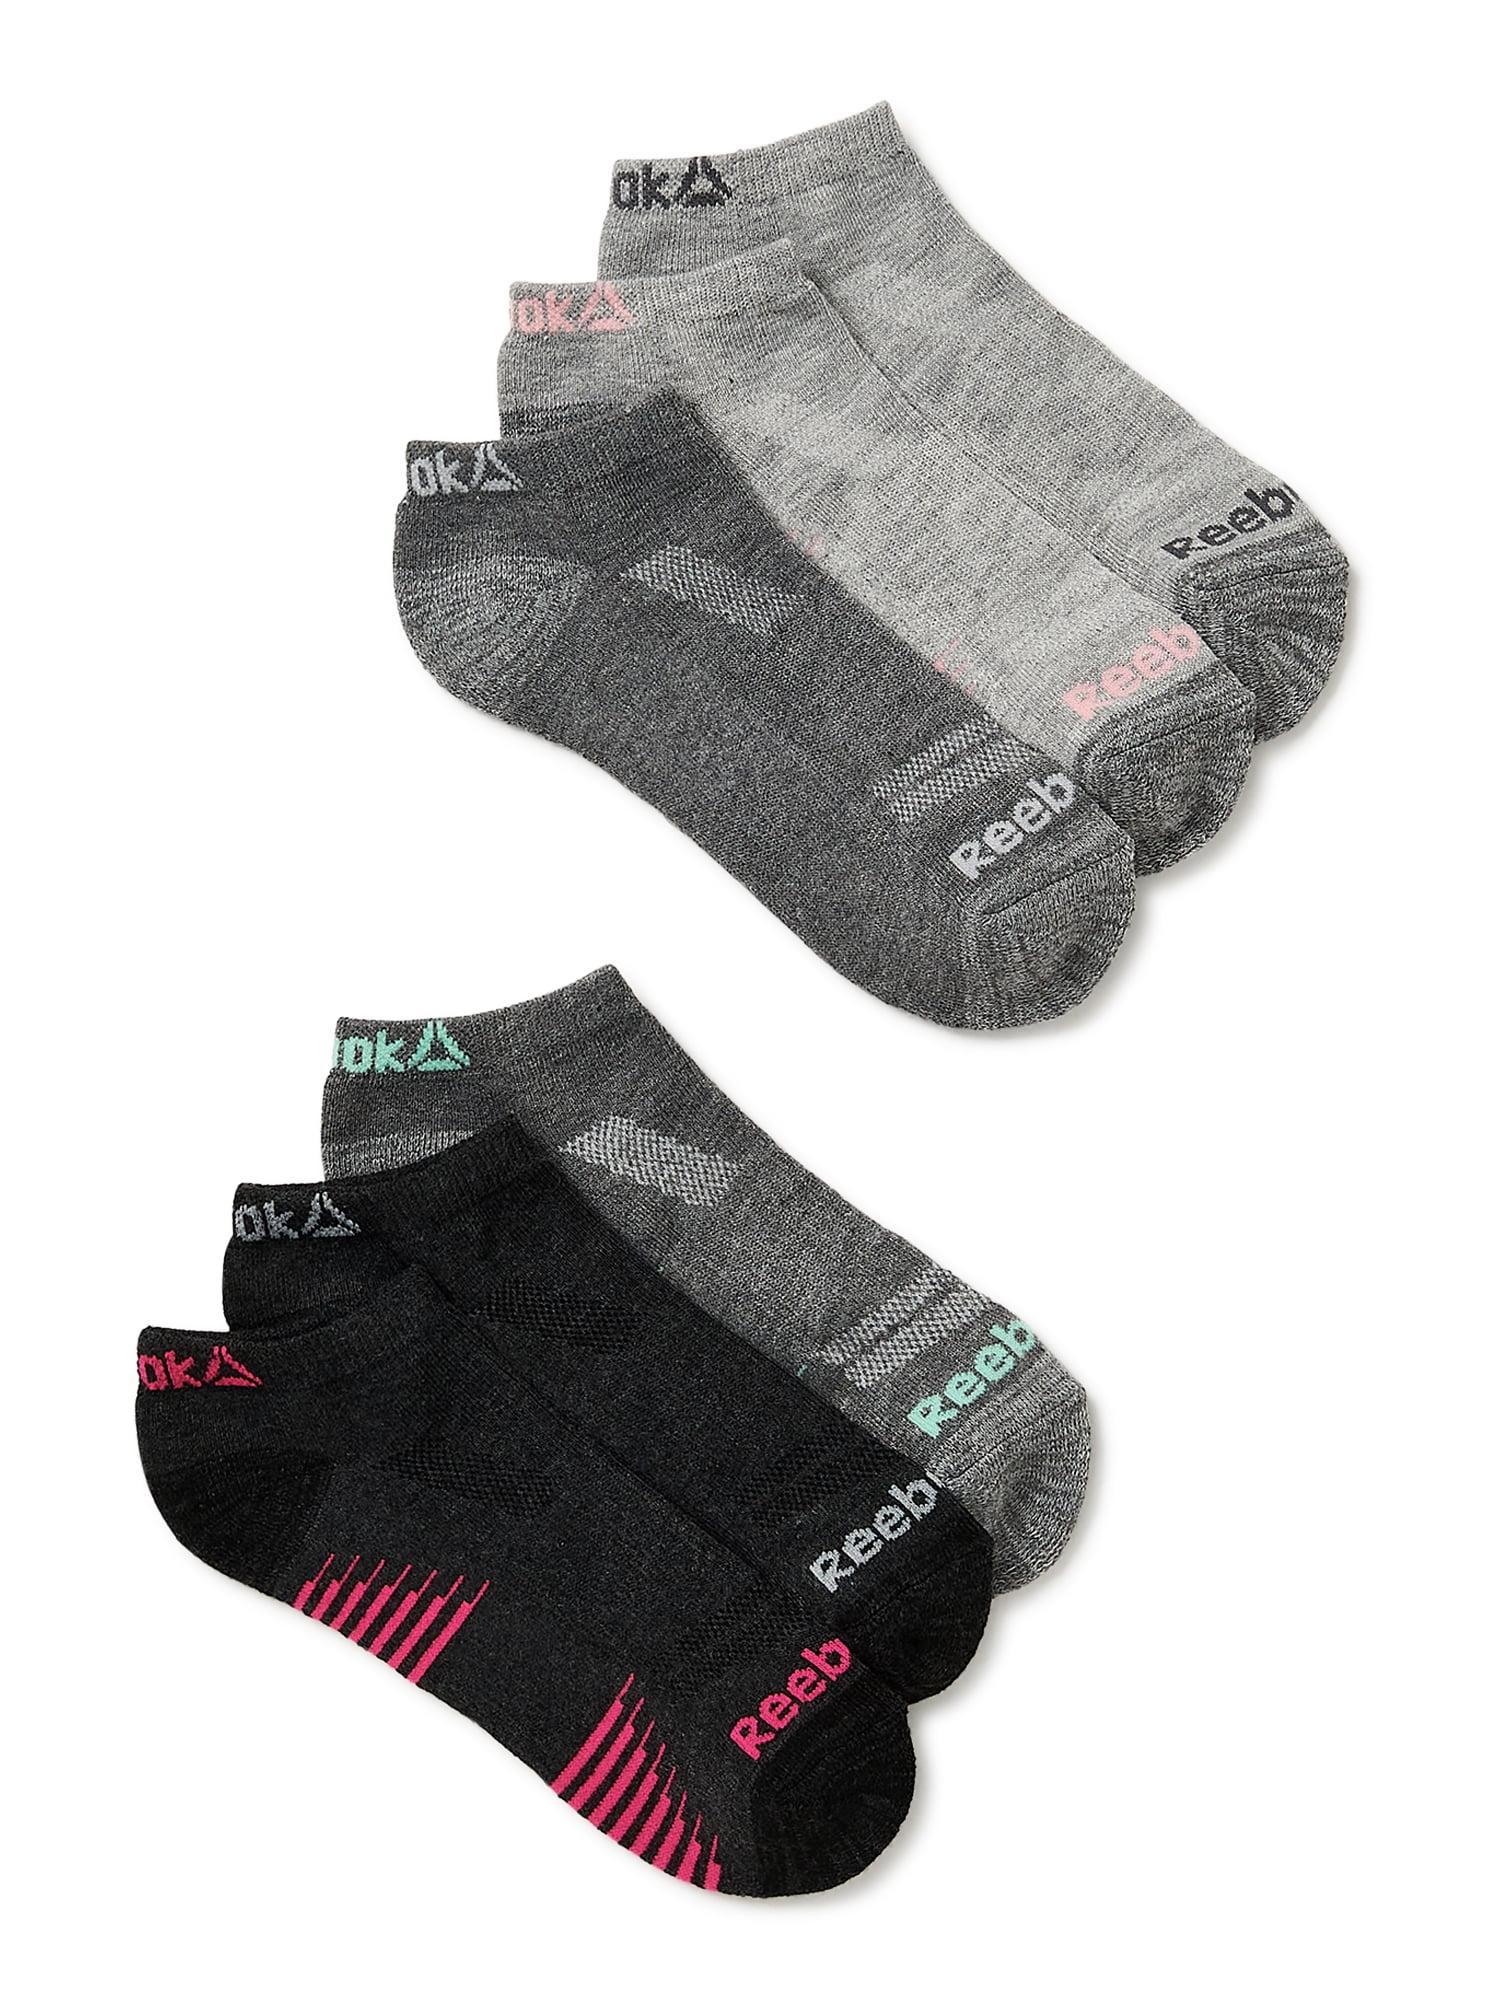 6 Pack Grey Assortment, Shoe Size: 4-10 Reebok Womens No-Show Athletic Performance Low Cut Cushioned Socks 